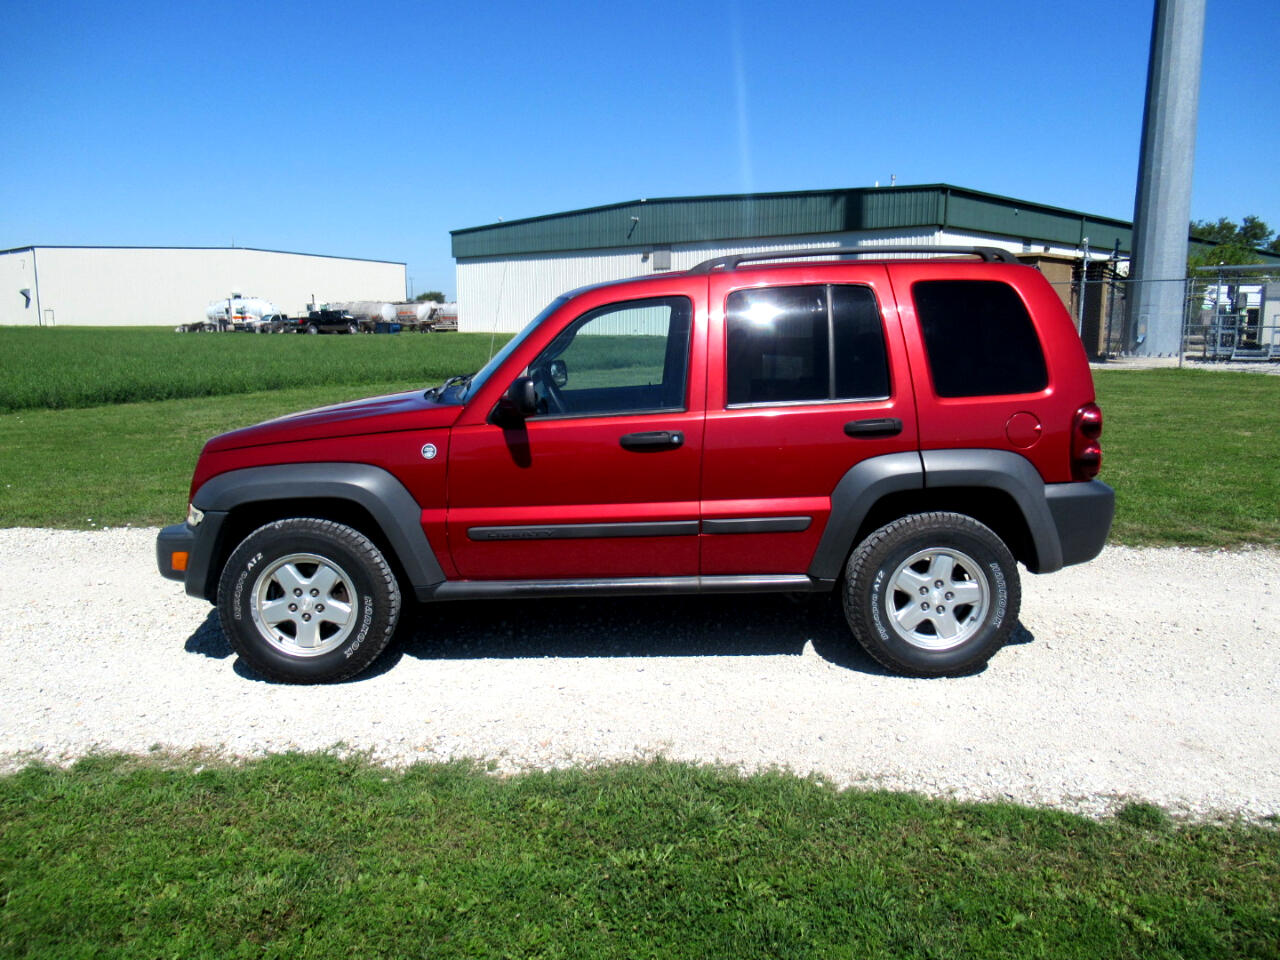 Used 2006 Jeep Liberty 4dr Sport 4WD for Sale in Council Bluffs IA 51501 A1  Auto Sales